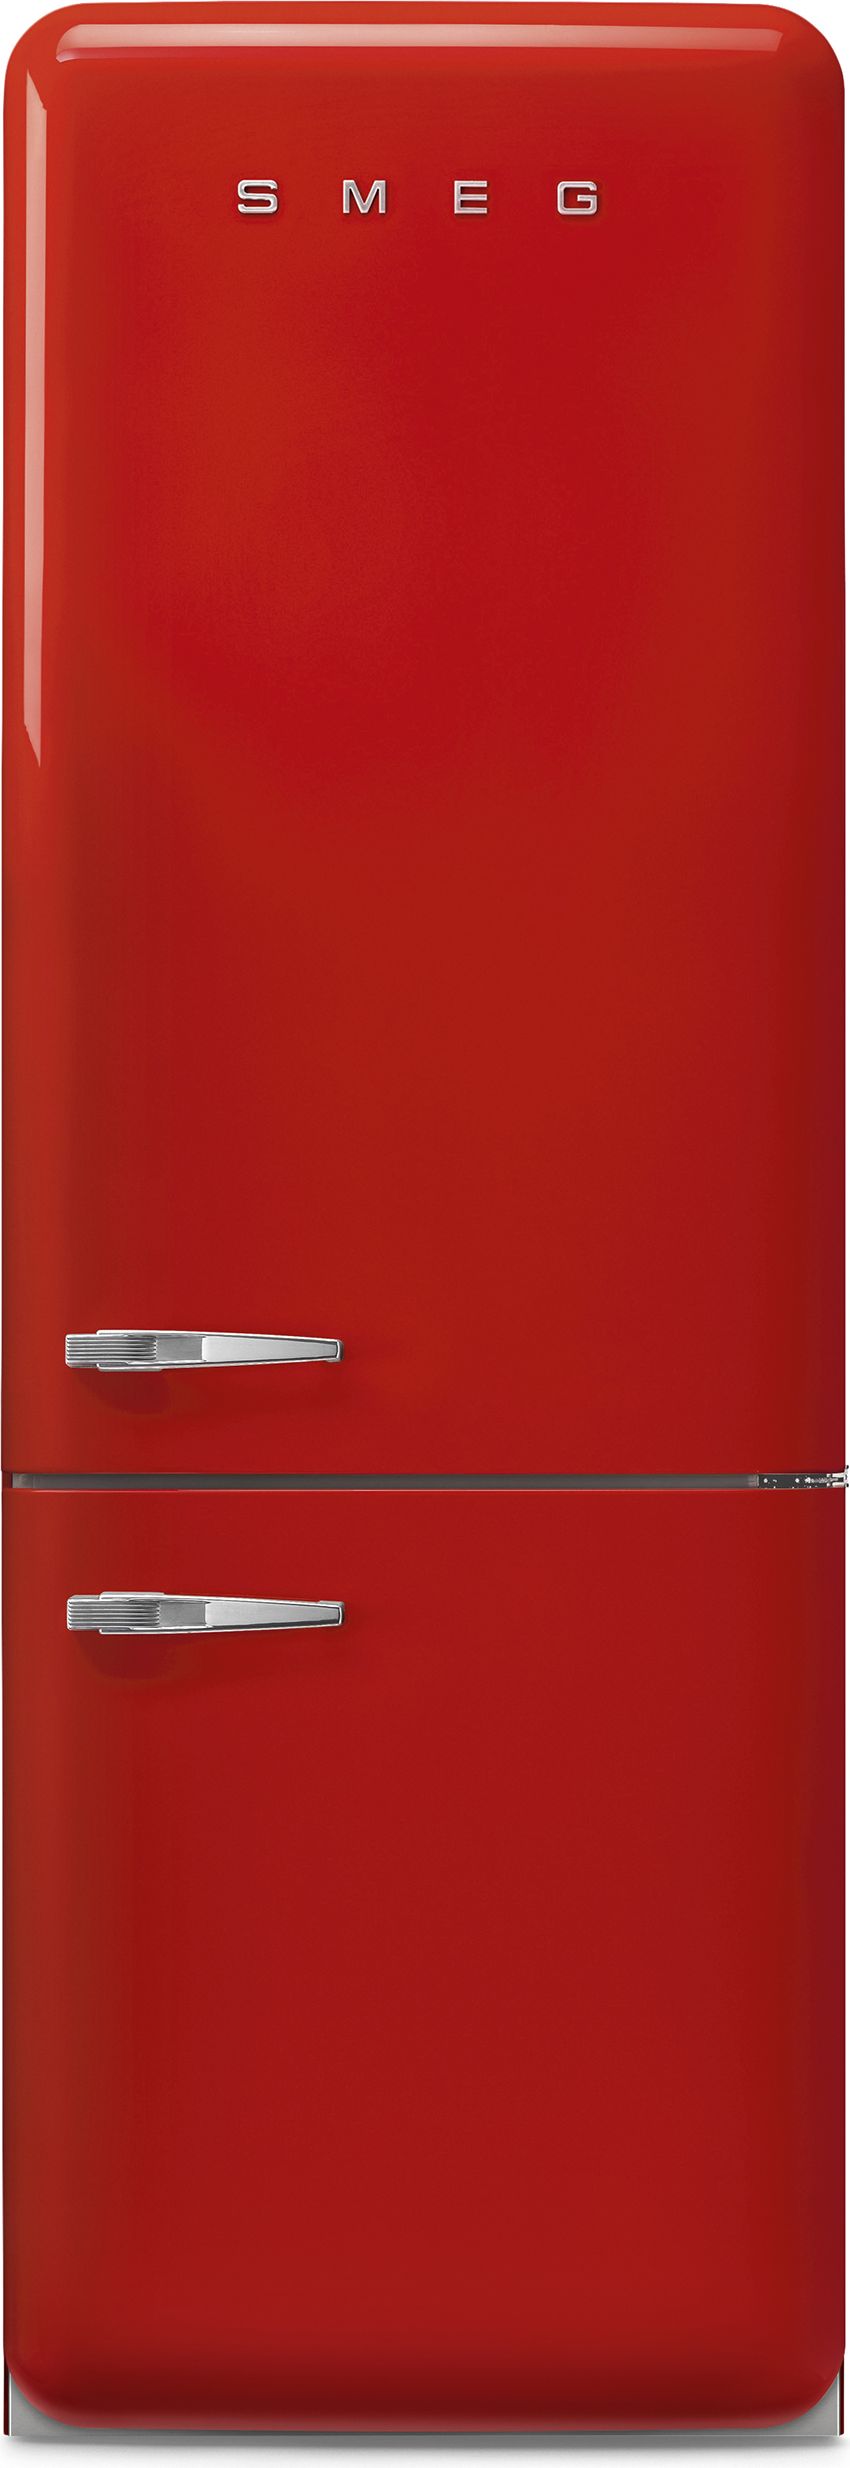 Smeg Right Hand Hinge FAB38RRD5 70/30 Frost Free Fridge Freezer - Red - E Rated, Red